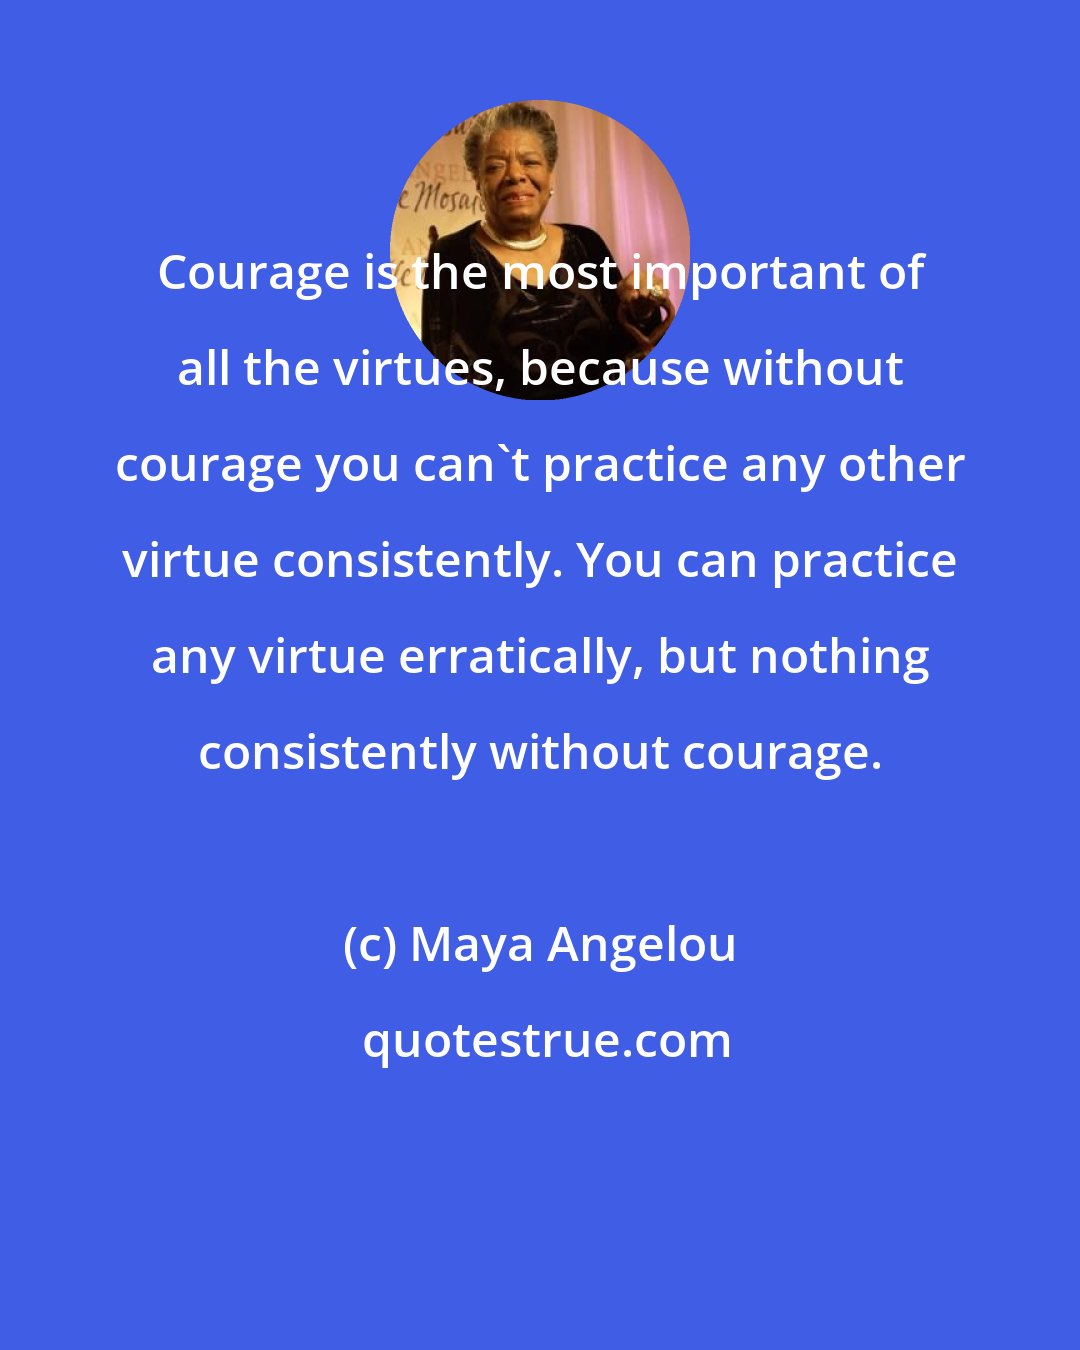 Maya Angelou: Courage is the most important of all the virtues, because without courage you can't practice any other virtue consistently. You can practice any virtue erratically, but nothing consistently without courage.